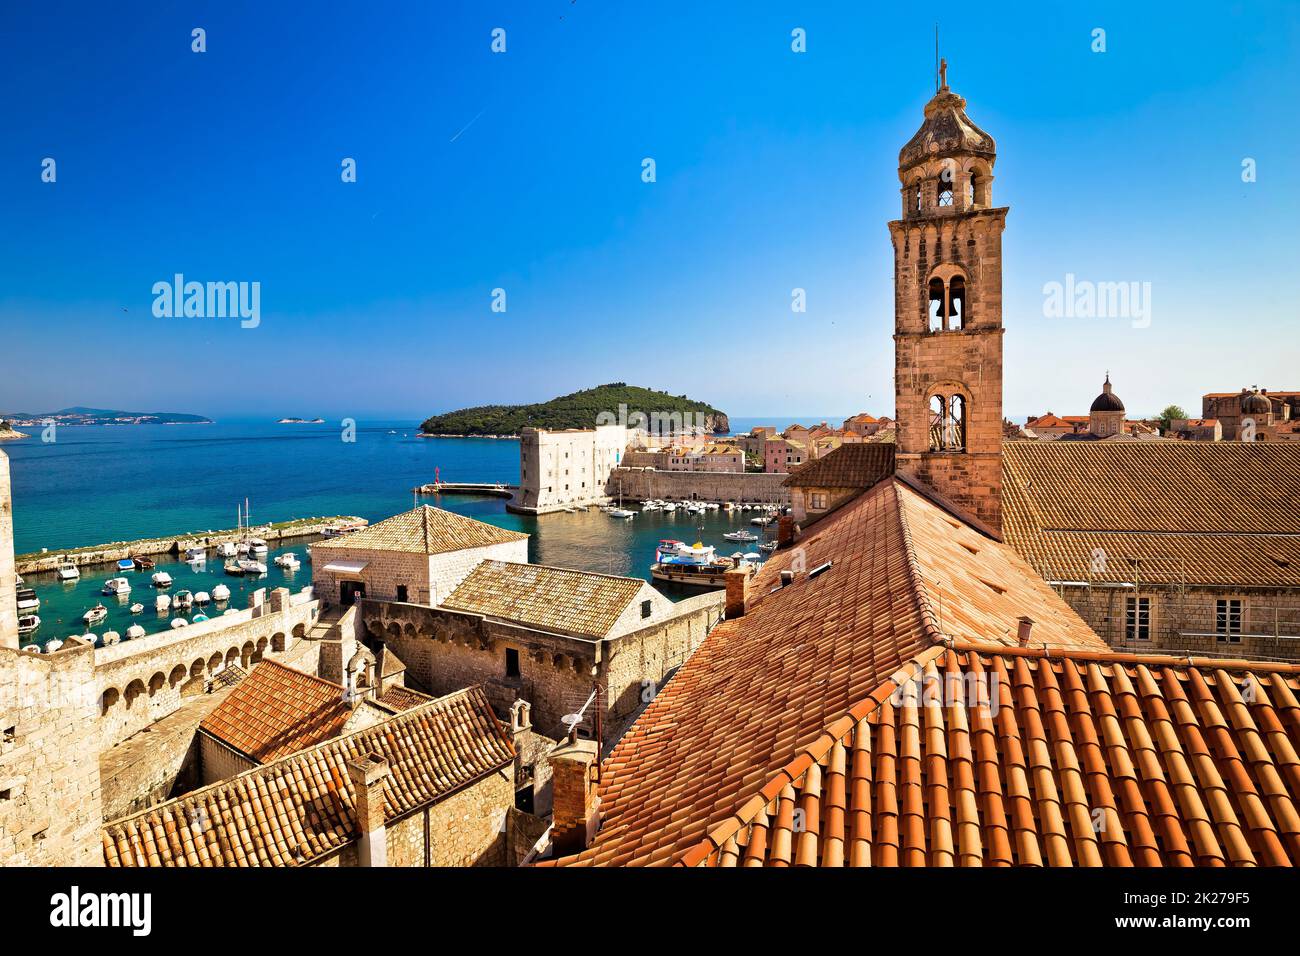 Dubrovnik. Scenic view of Dubrovnik historic walls and architecture Stock Photo